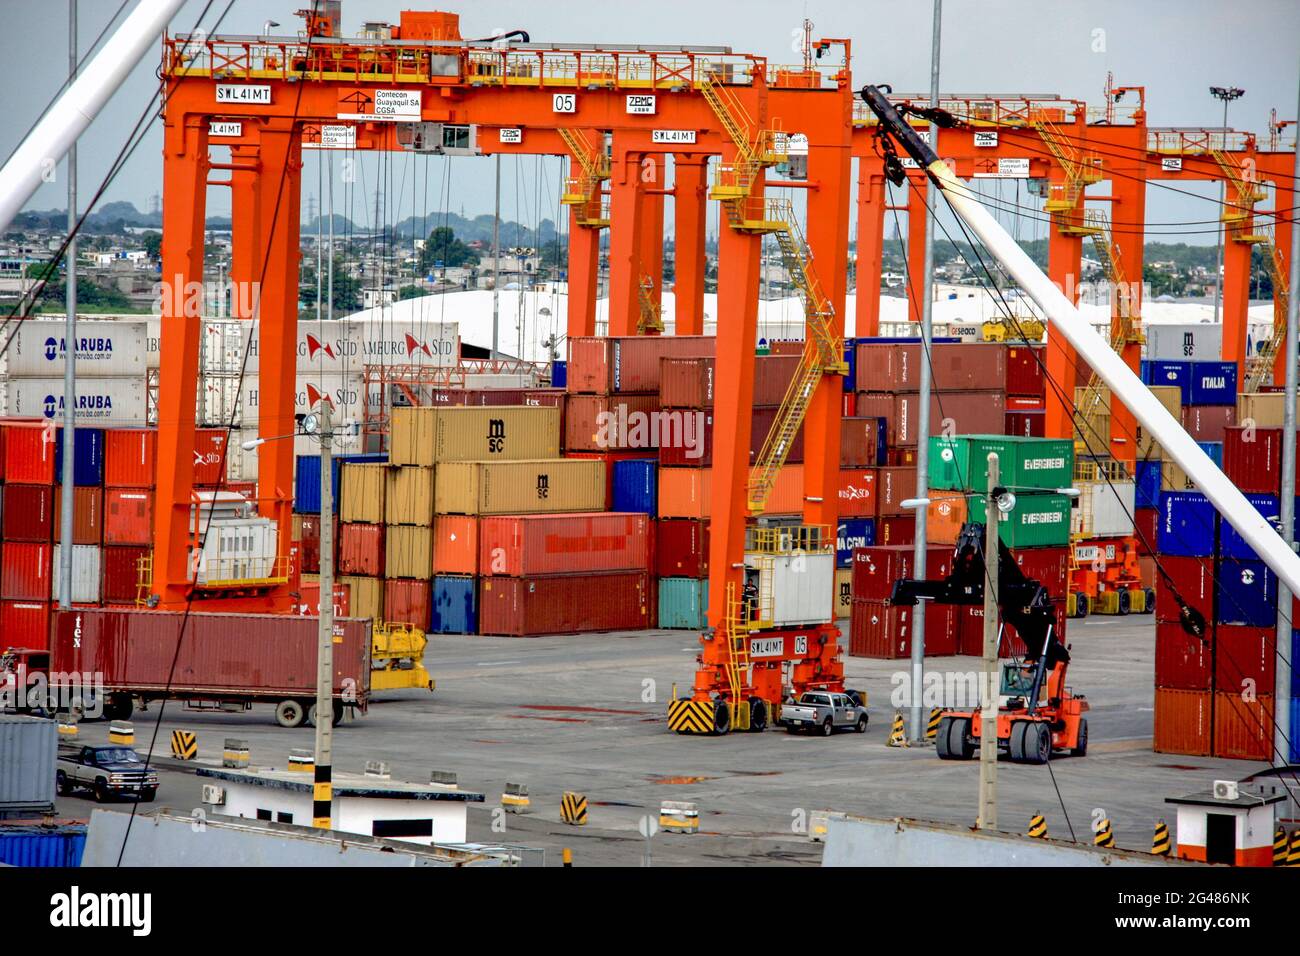 Large container lifting facilities at Port of Callao, Peru Stock Photo